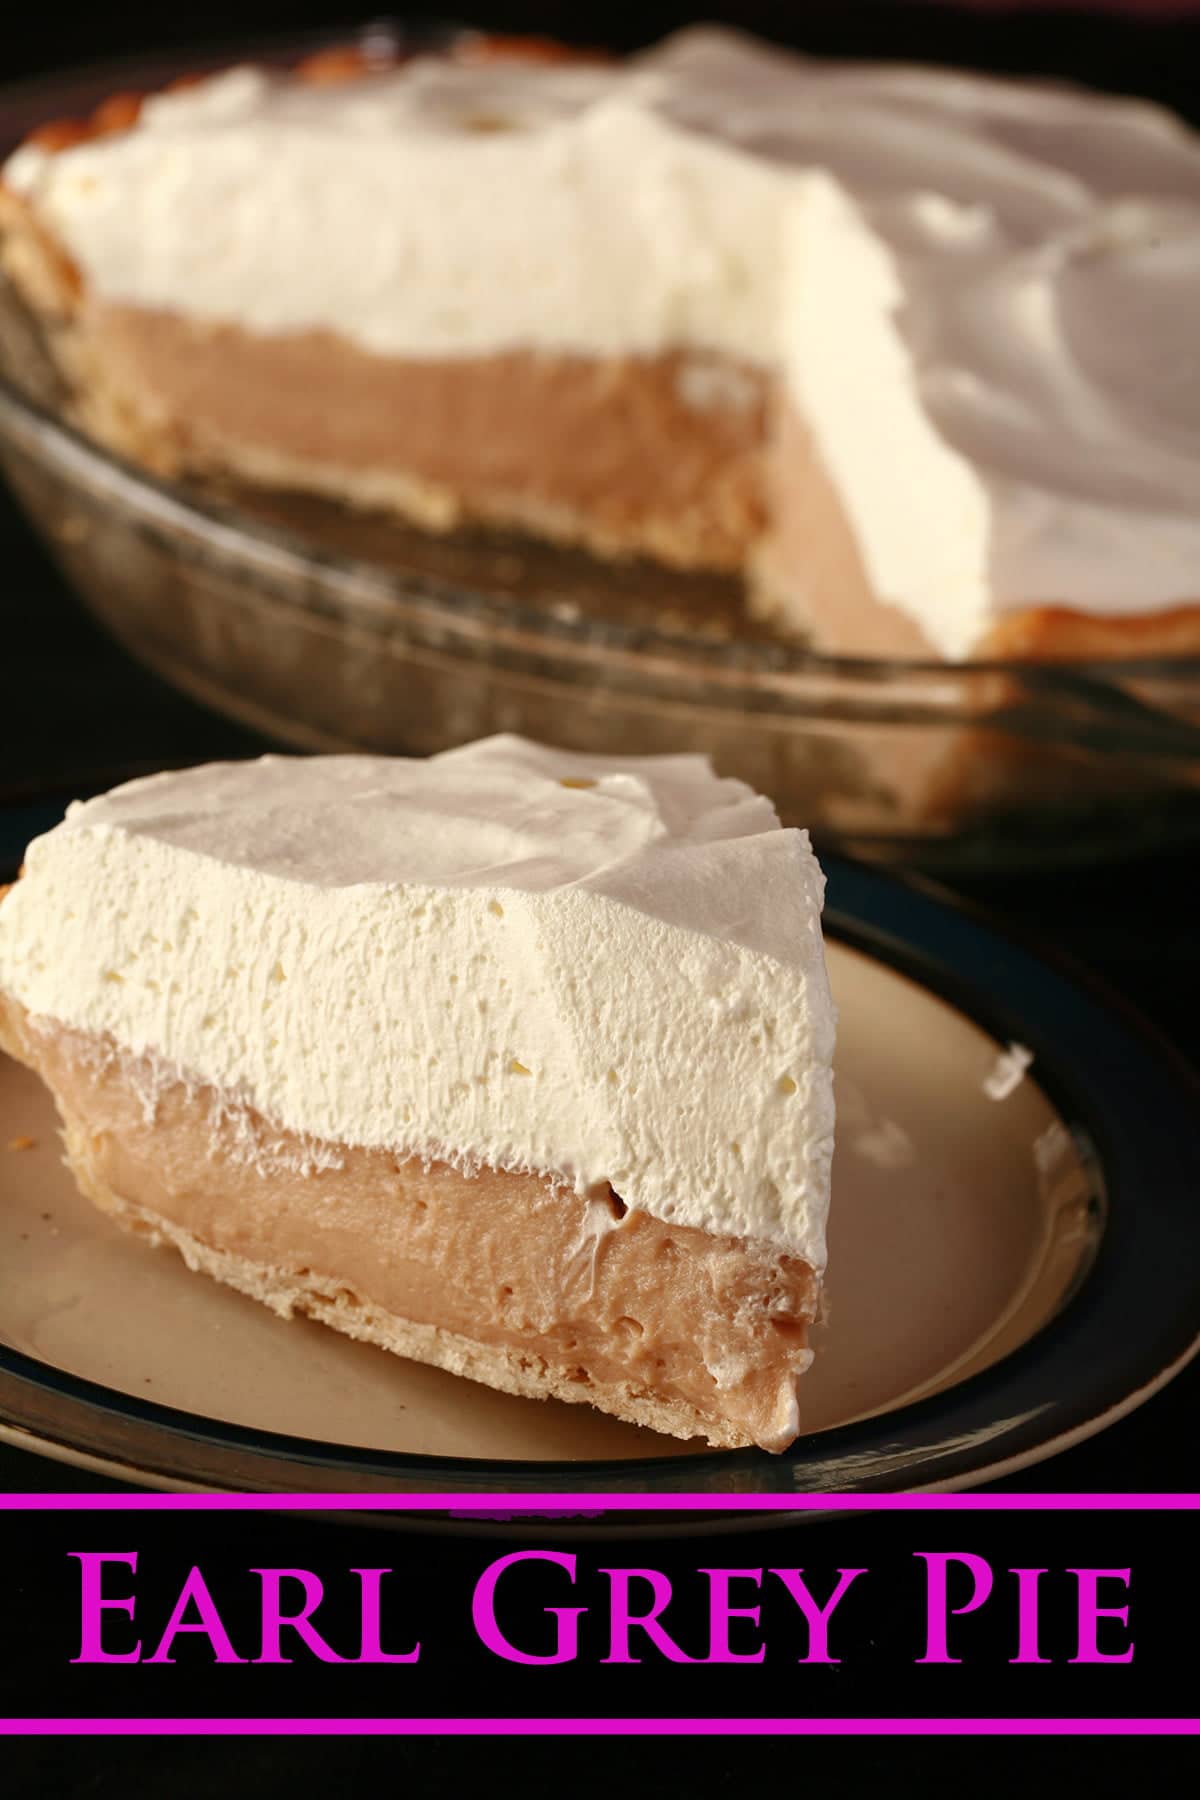 A slice of Earl Grey Custard Pie - A greige custard pie, topped with whipped cream.